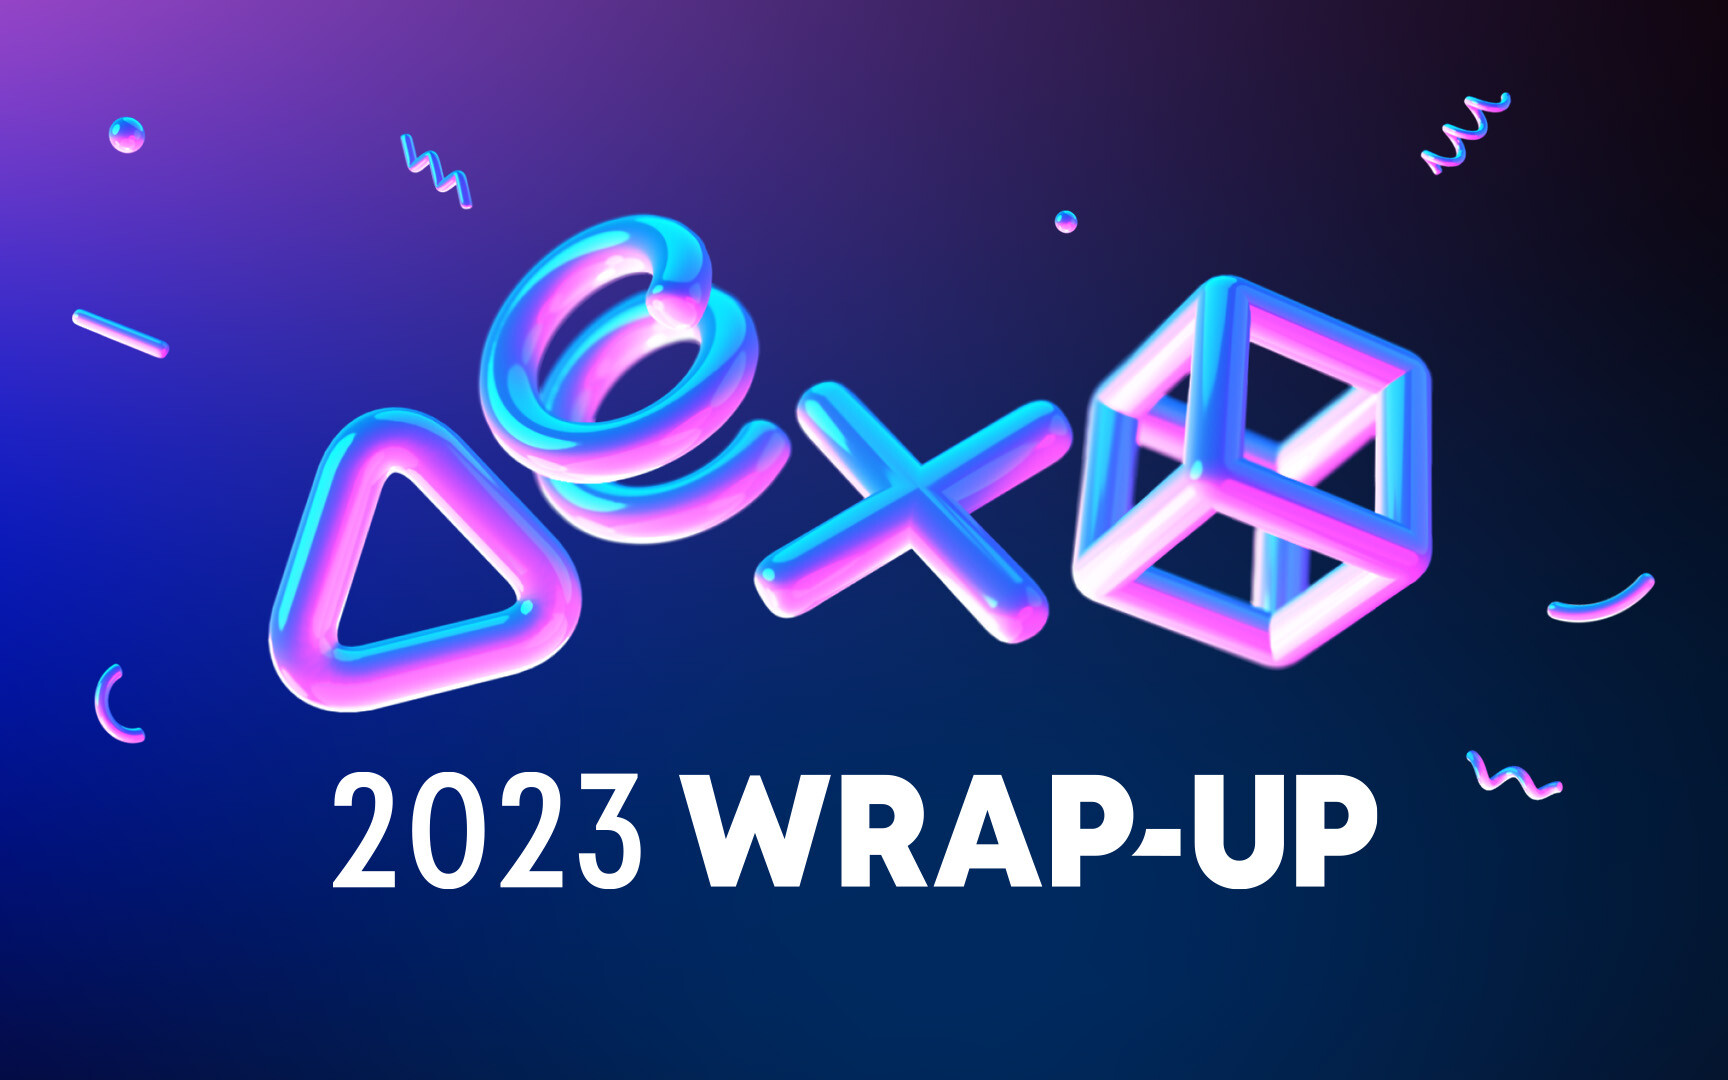 PlayStation 2023 Wrap-Up